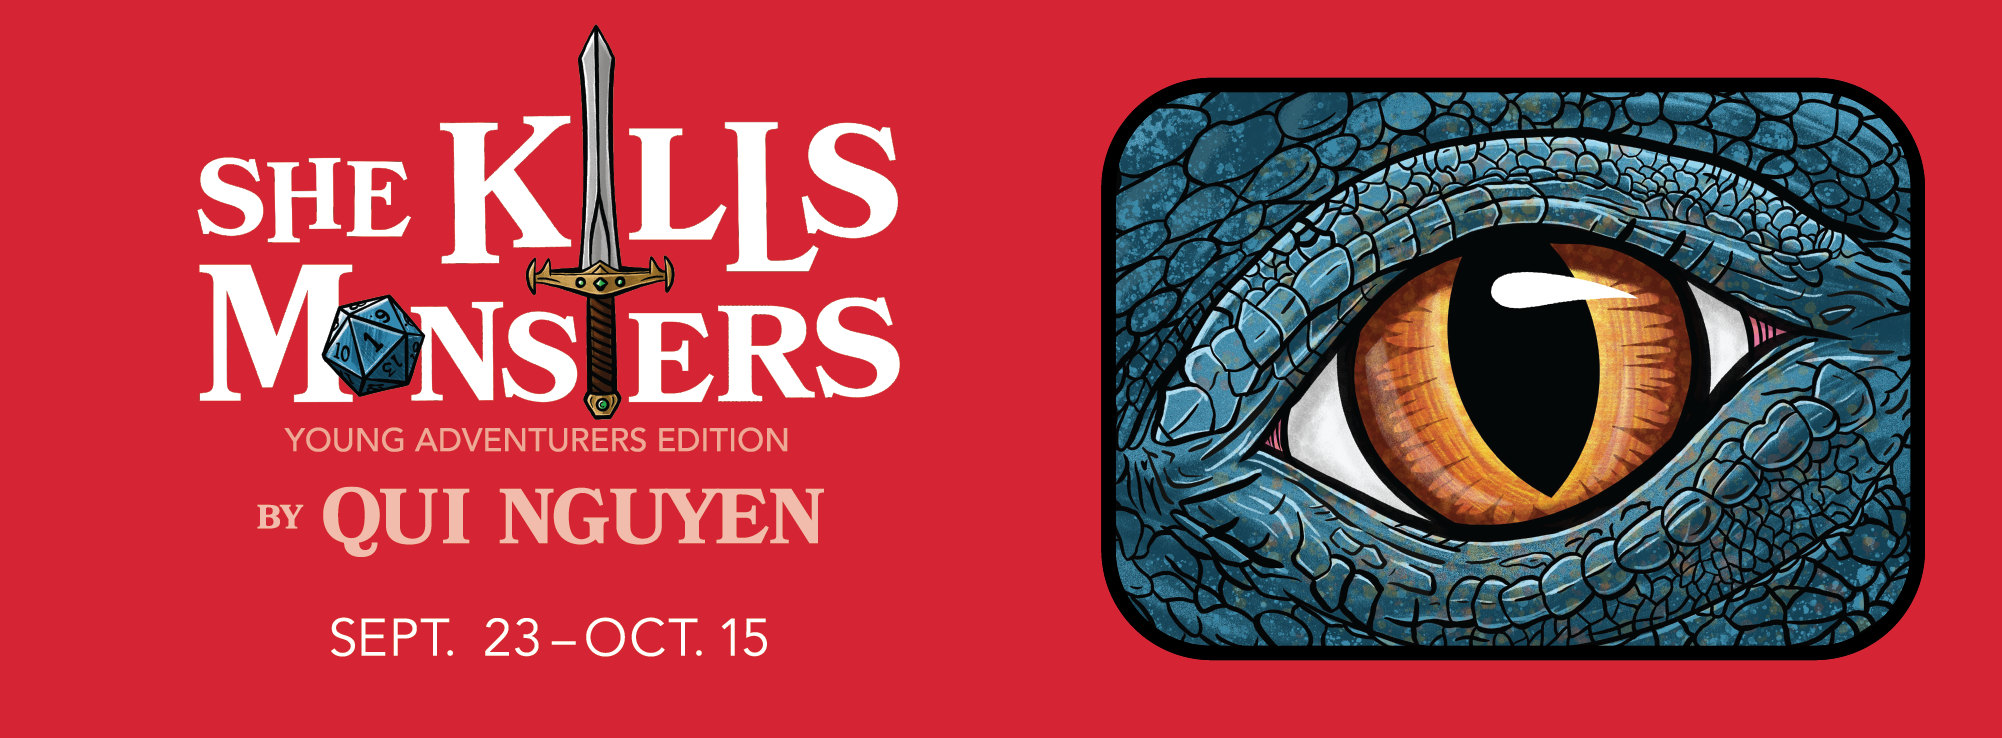 “She Kills Monsters: Young Adventurers Edition” opens Sept. 23